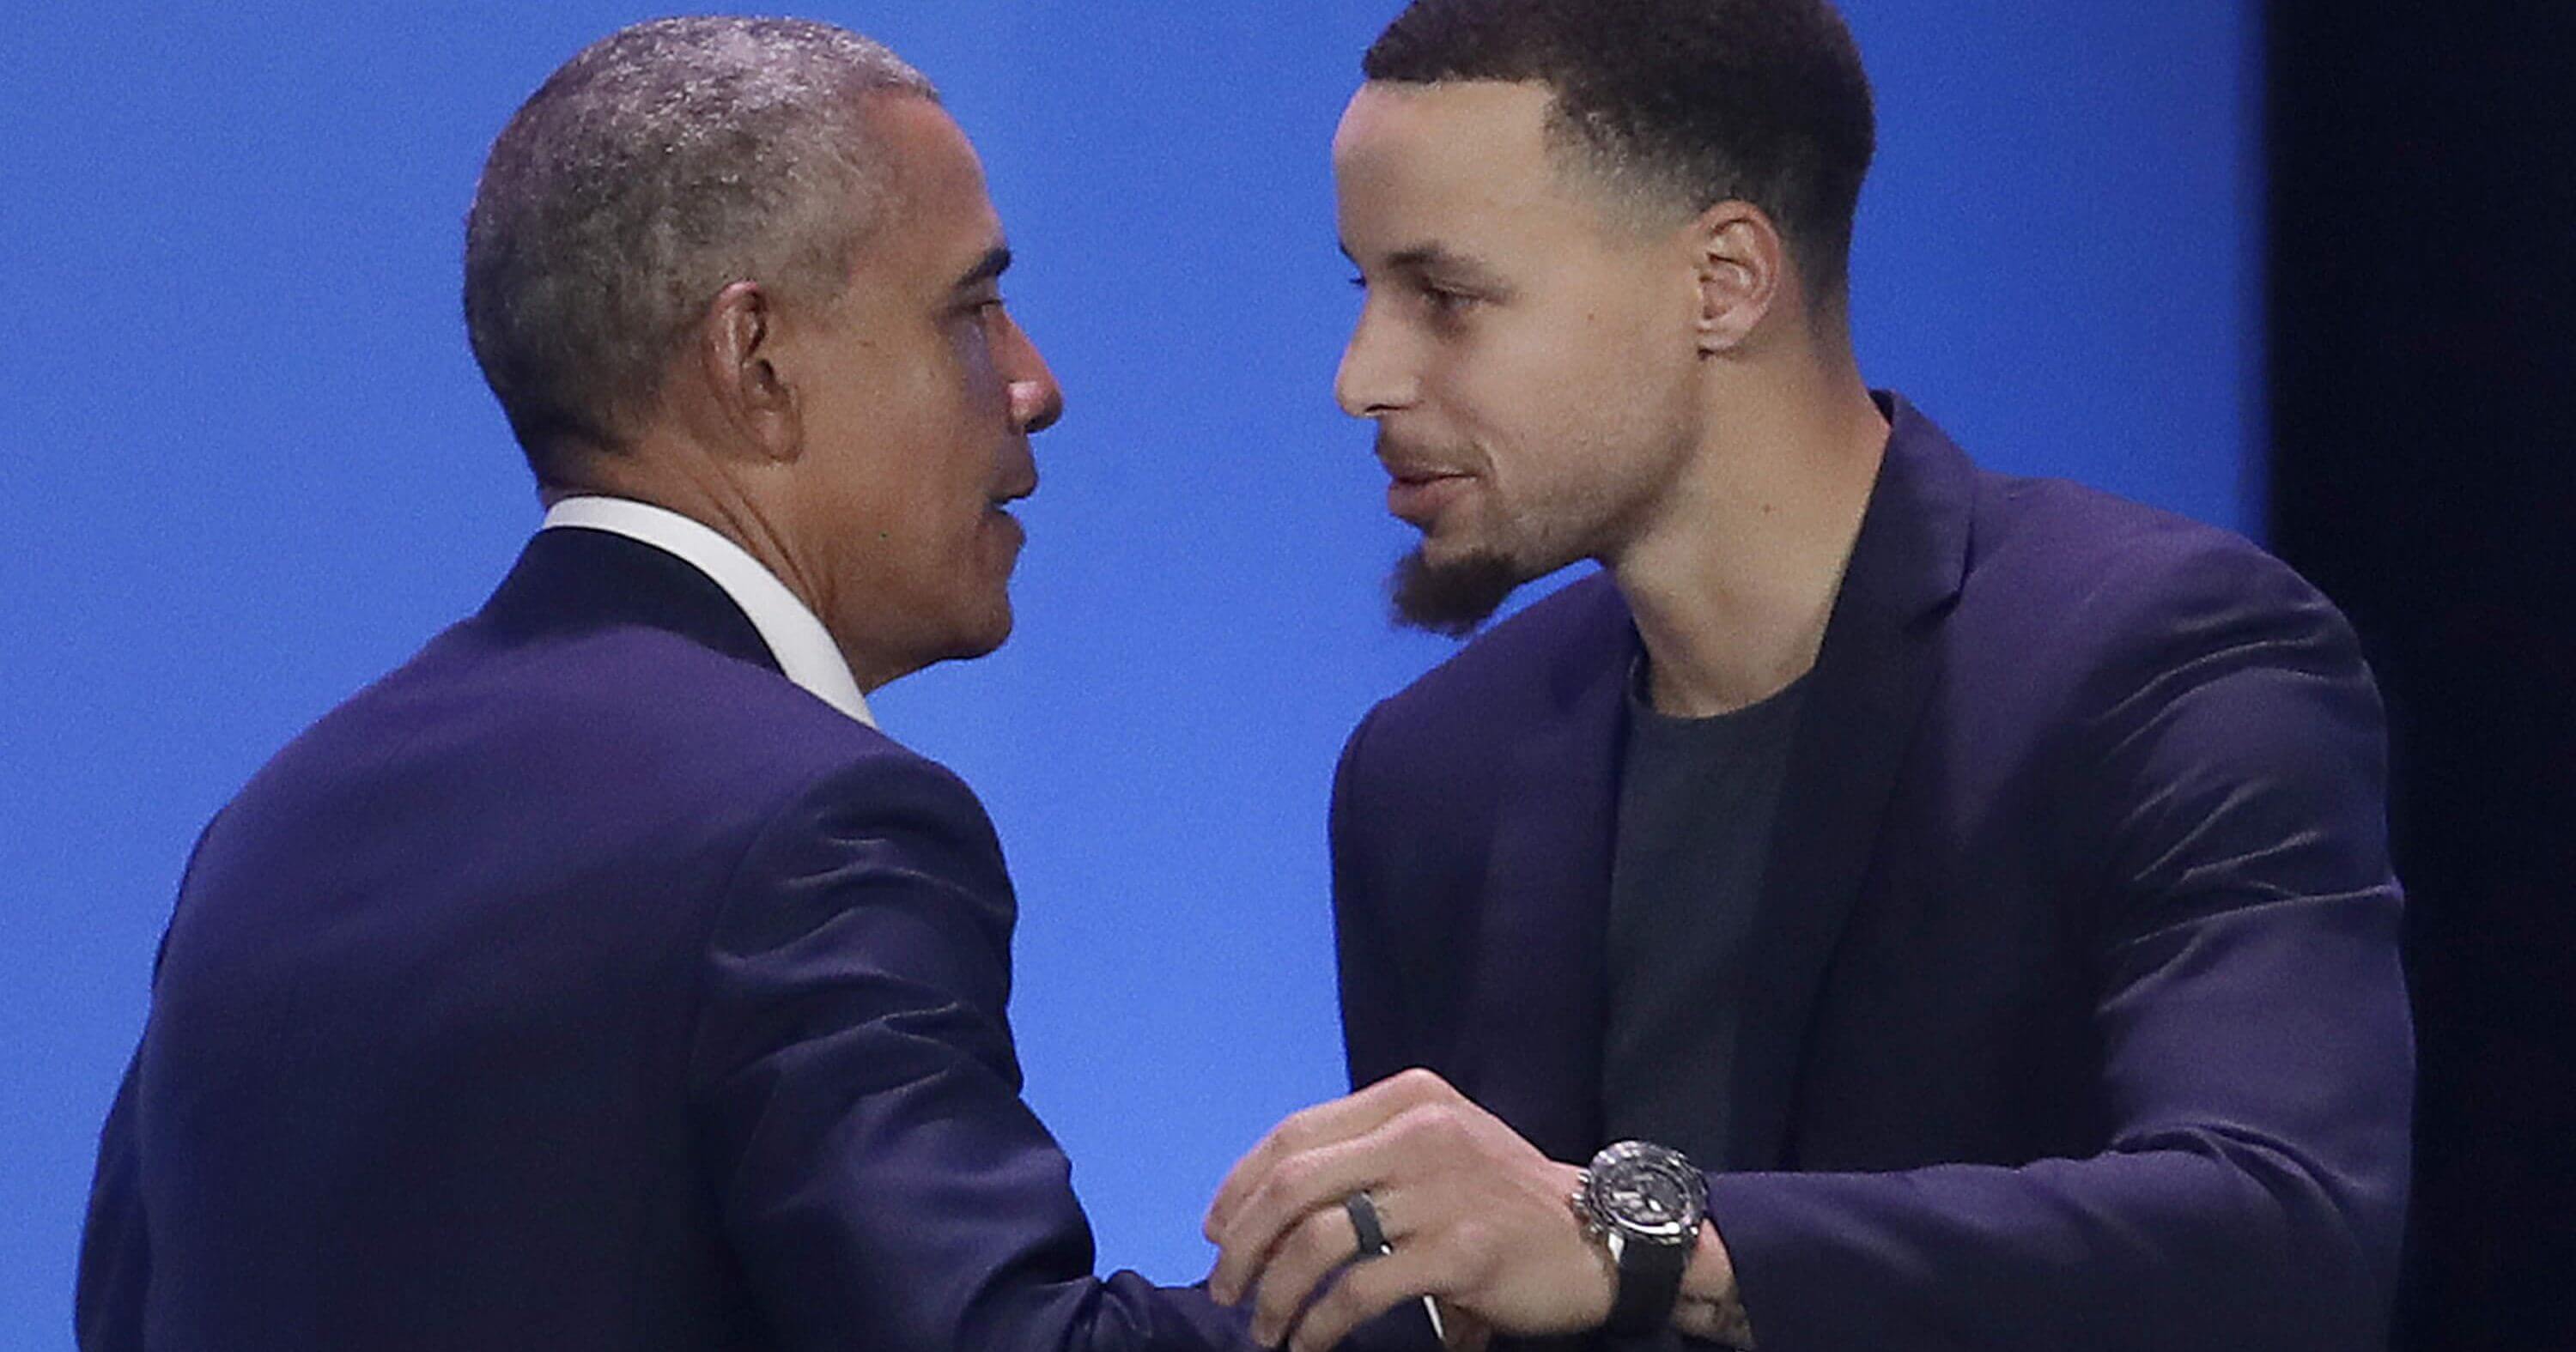 Former President Barack Obama, left, hugs Golden State Warriors basketball player Stephen Curry after speaking at the My Brother's Keeper Alliance Summit in Oakland, California, on Tuesday.